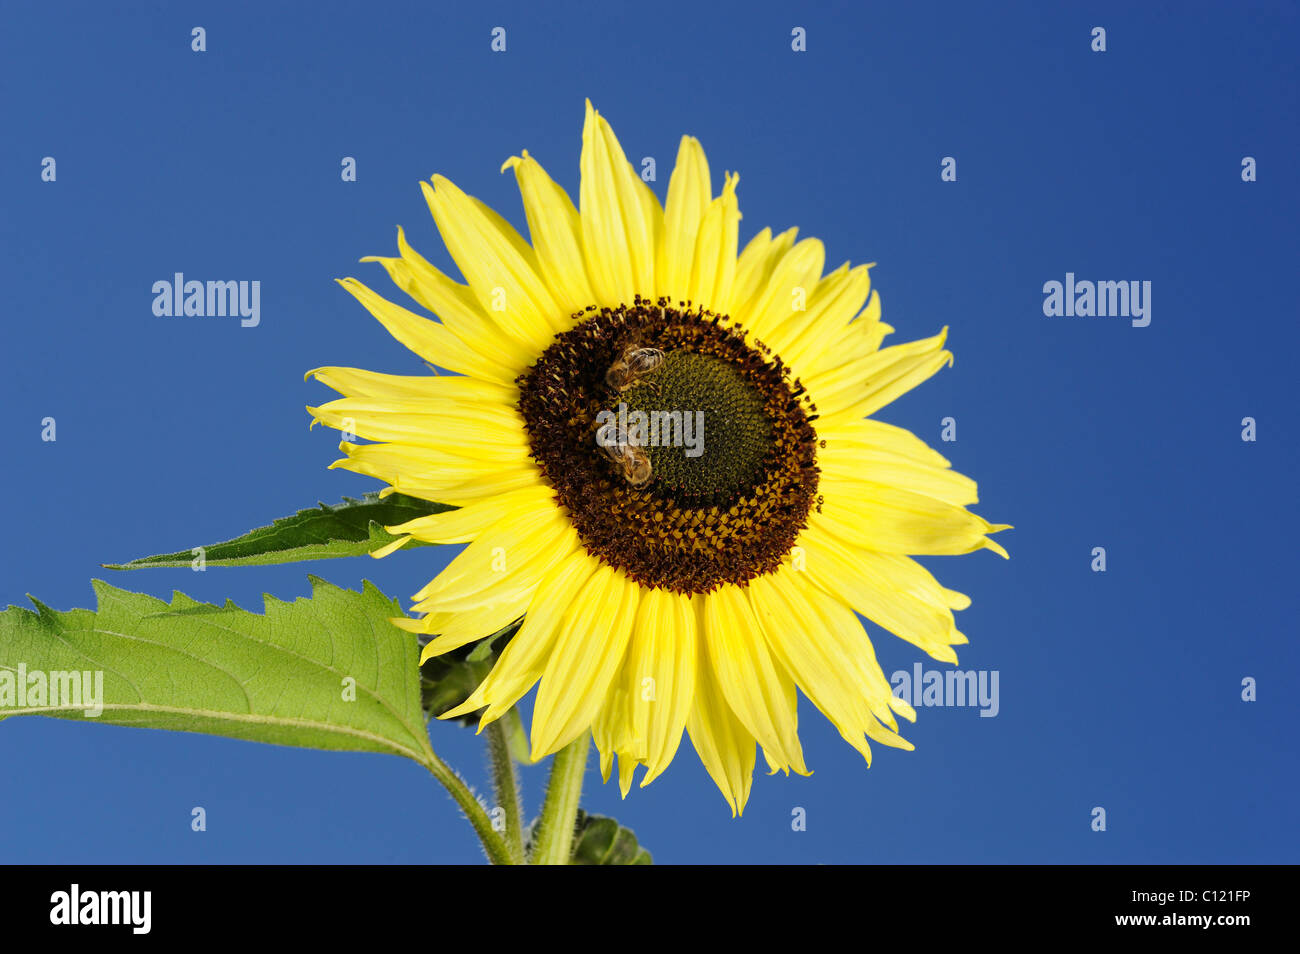 2 bees sitting on a sunflower Stock Photo